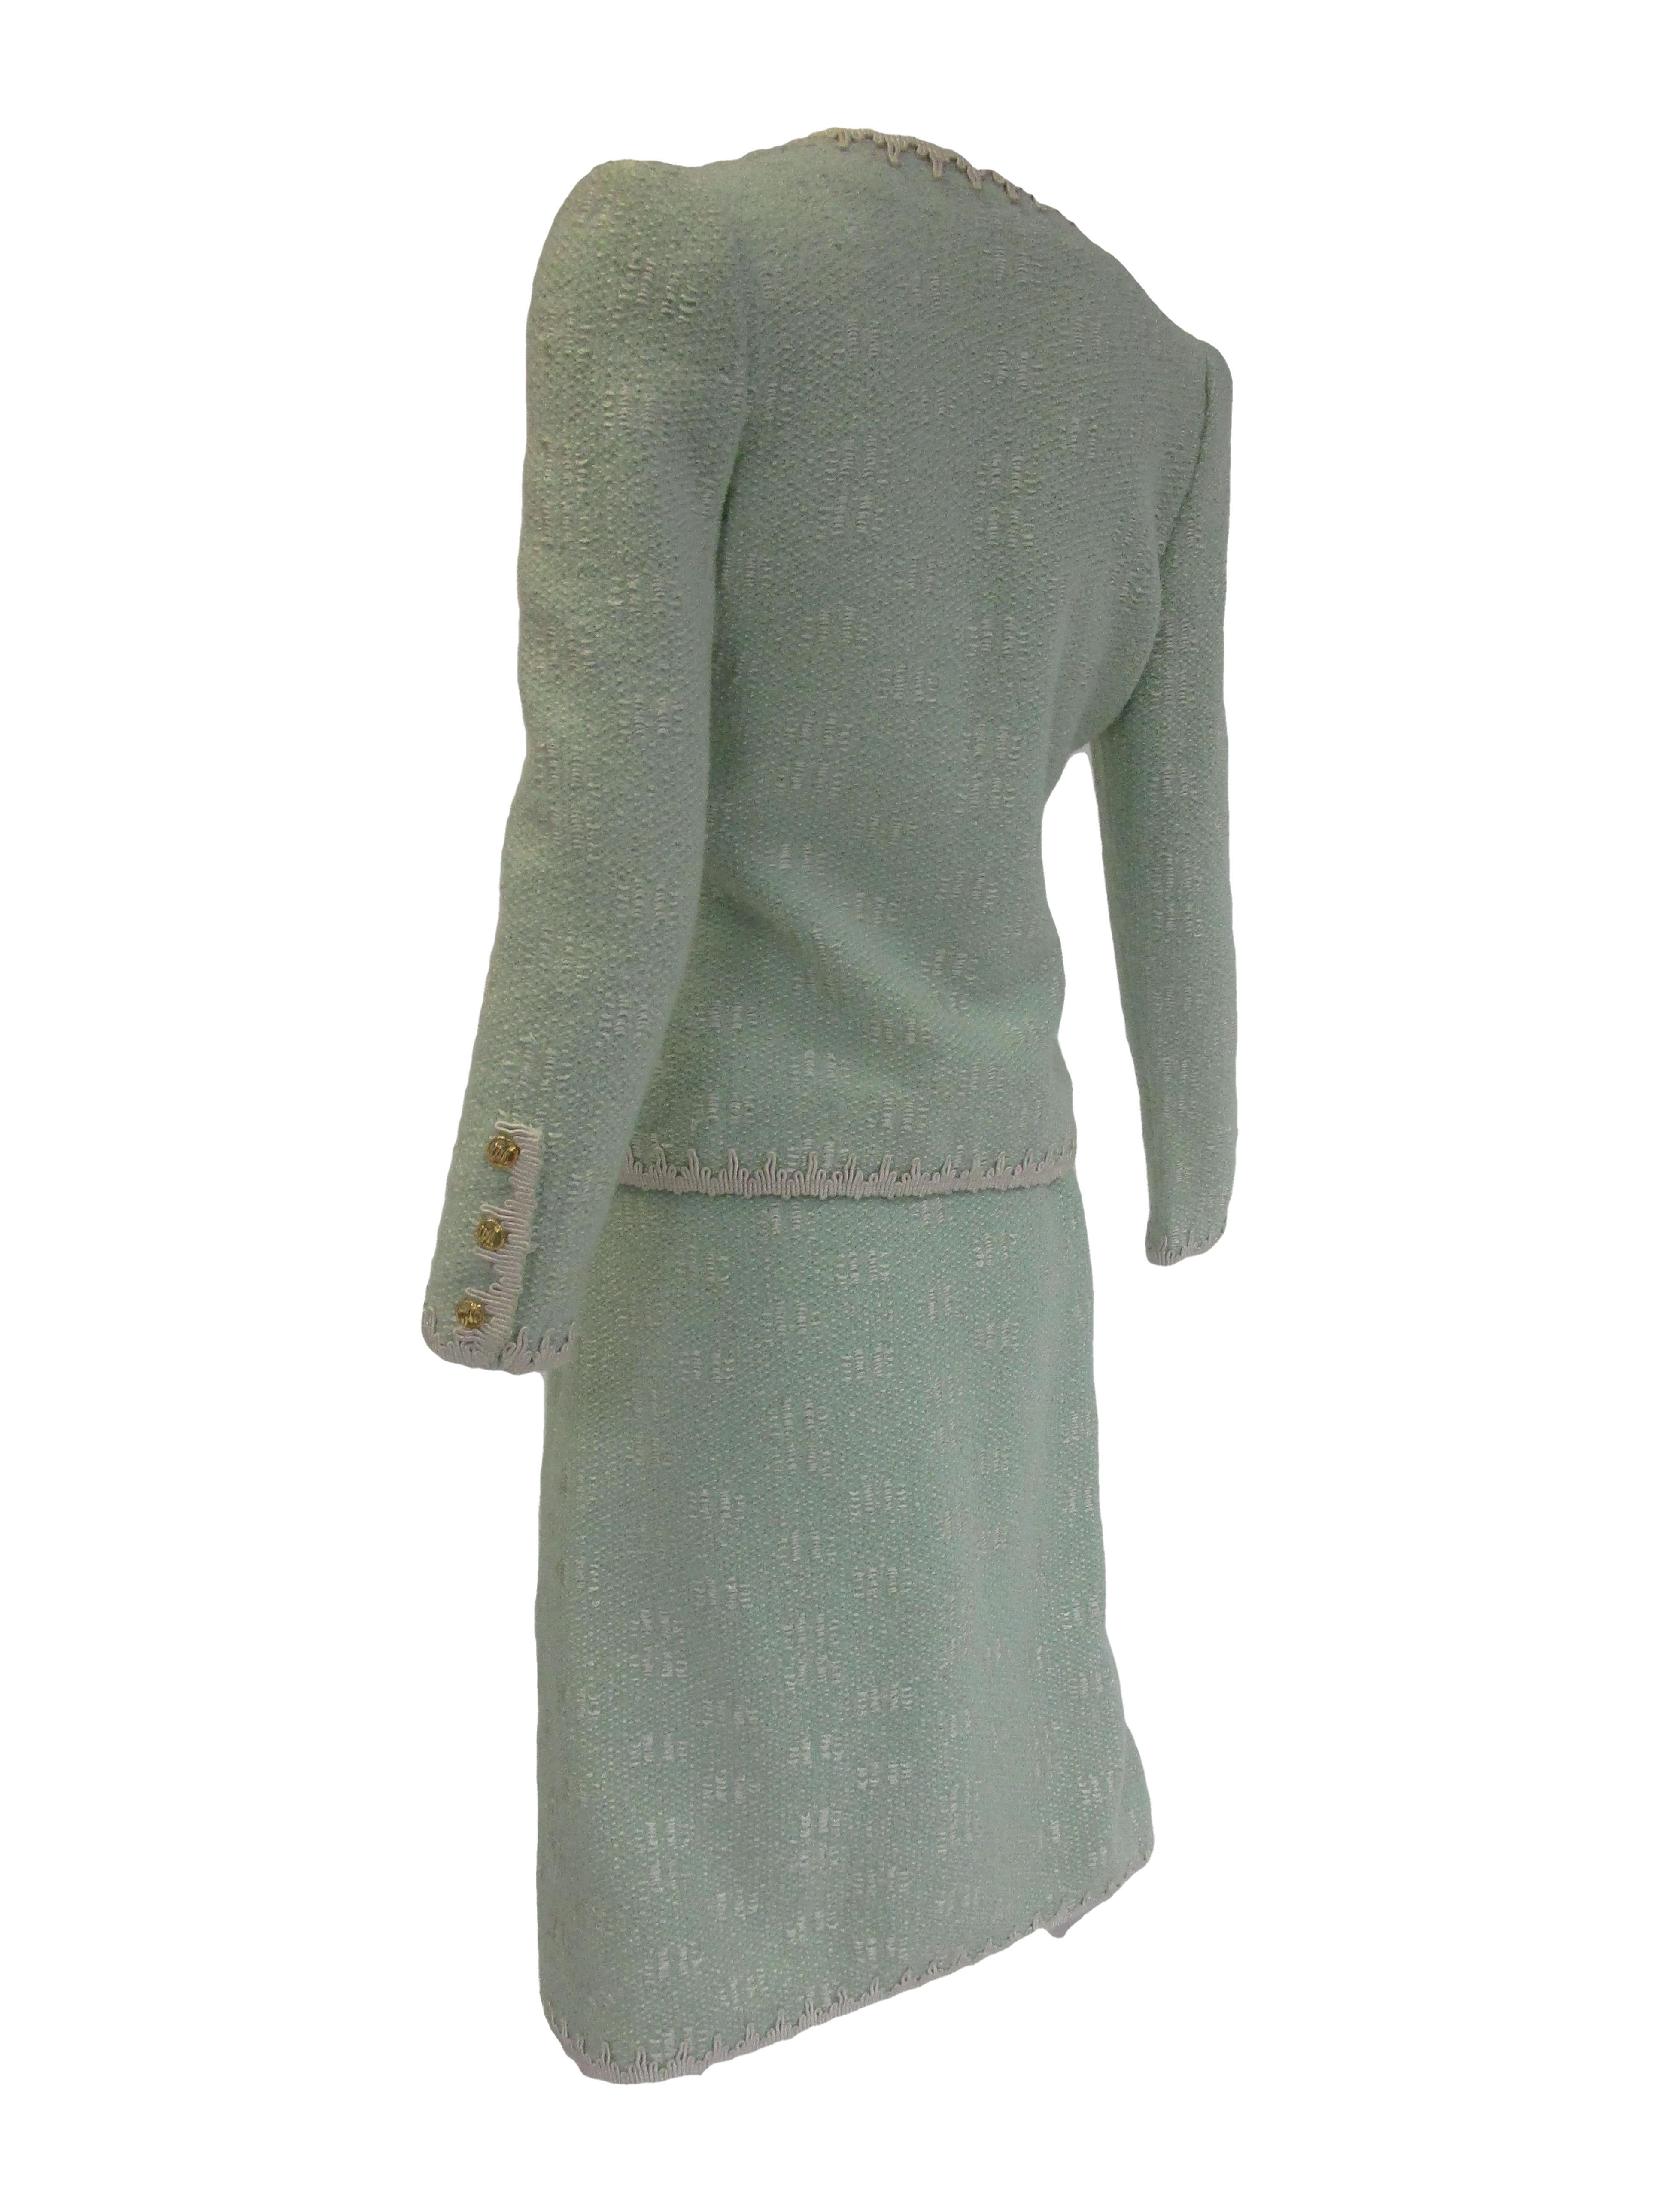 Women's 1970s Adolfo Mint Green Wool Knit Skirt and Jacket For Sale